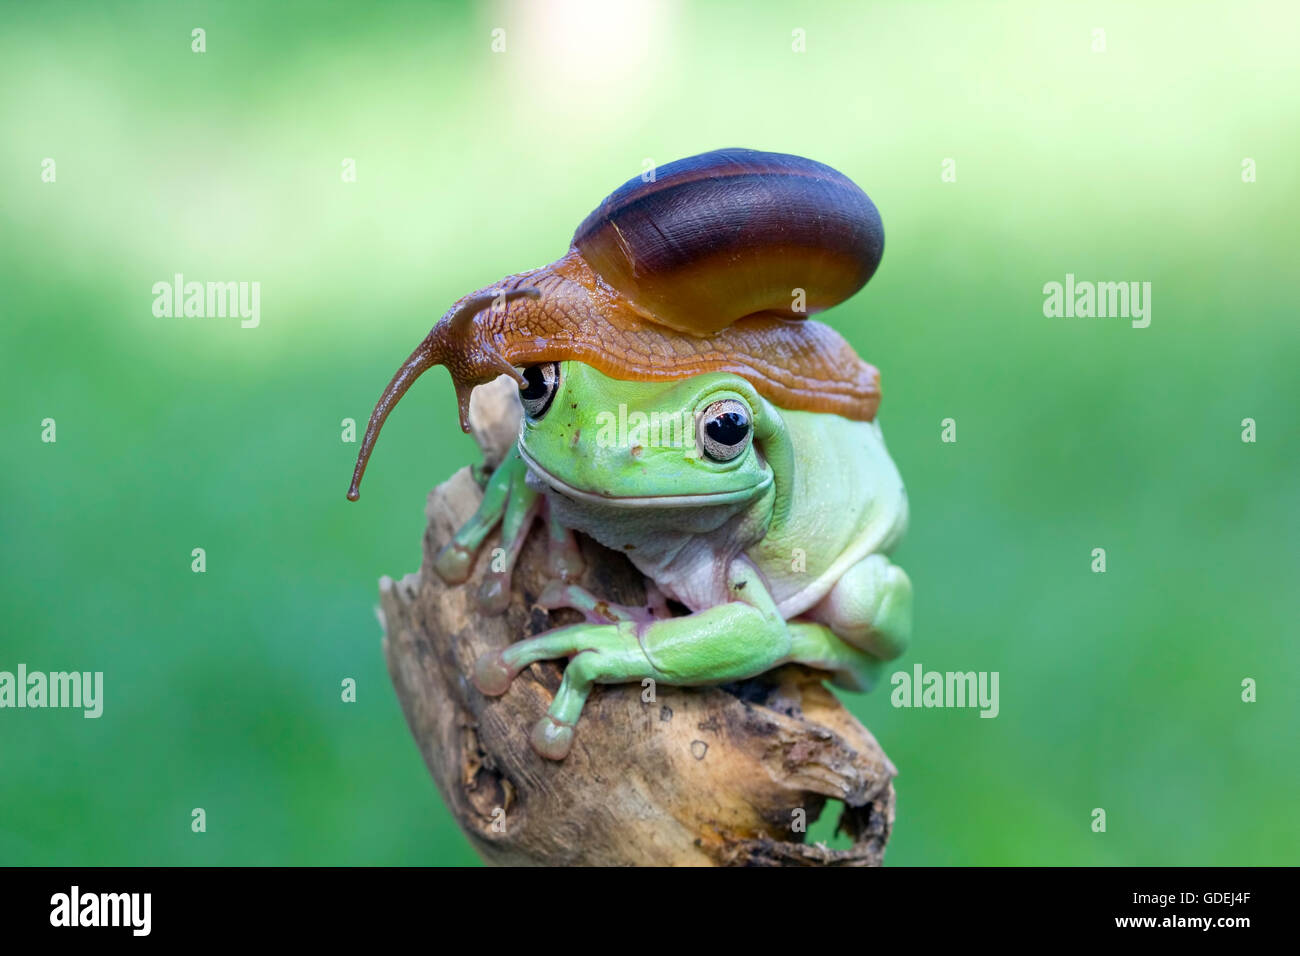 Snail sitting on top of a frog Stock Photo